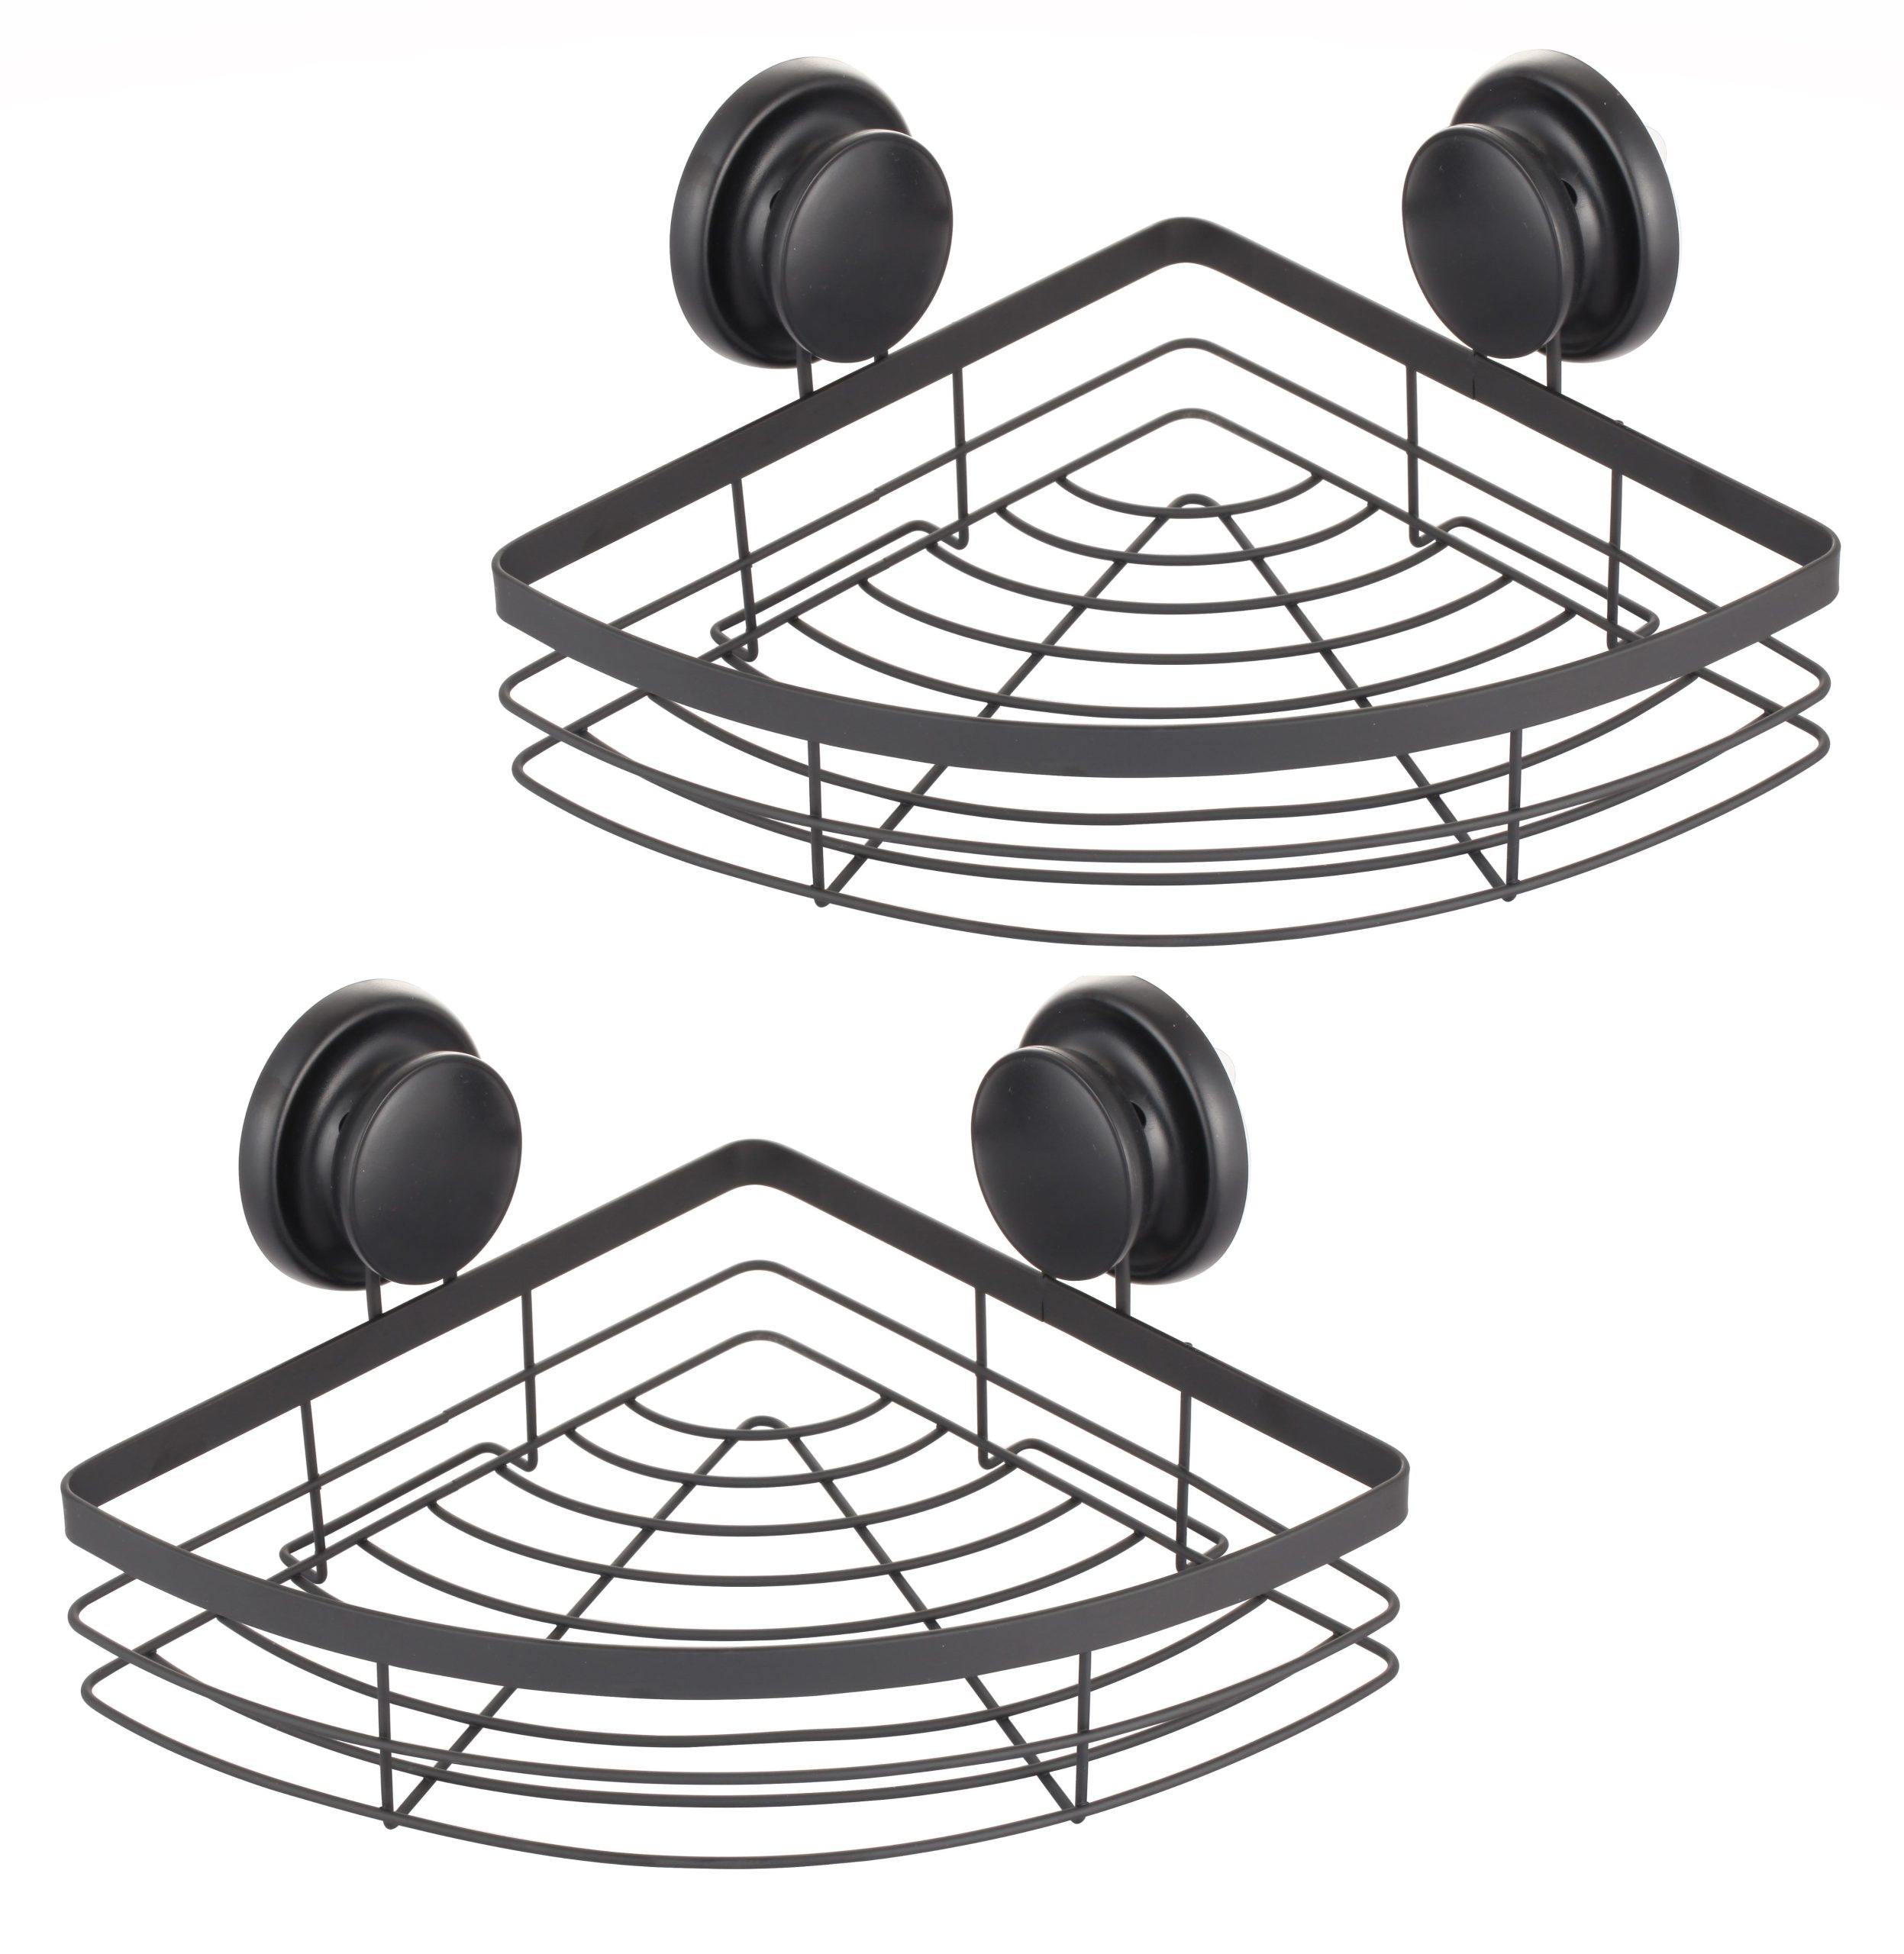 2 Pack Round Corner Shower Caddy Shelf Basket Rack with Premium Vacuum Suction Cup No-Drilling for Bathroom and Kitchen